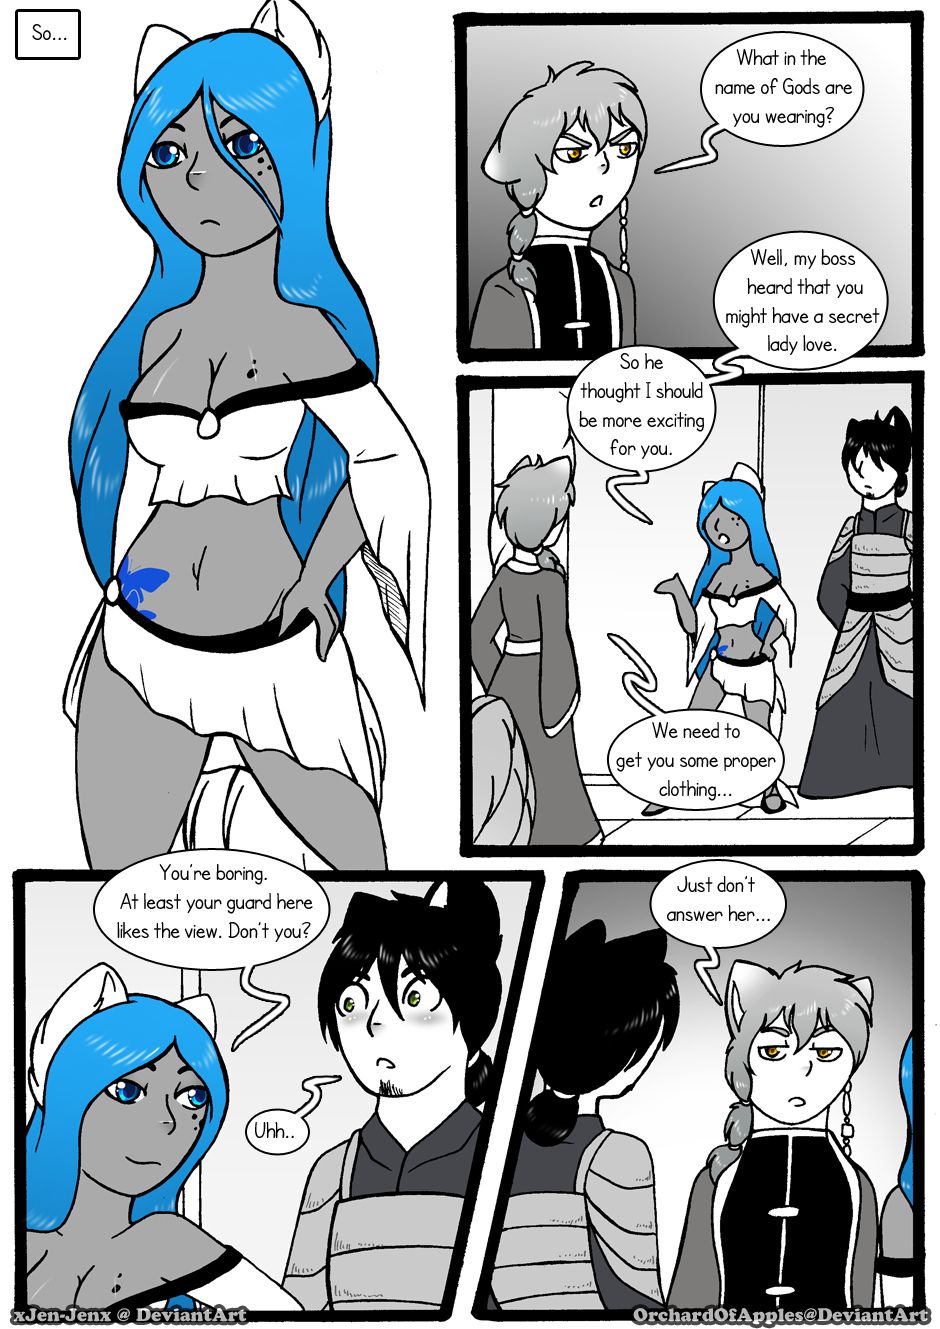 [Jeny-jen94] Between Kings and Queens [Ongoing] 159